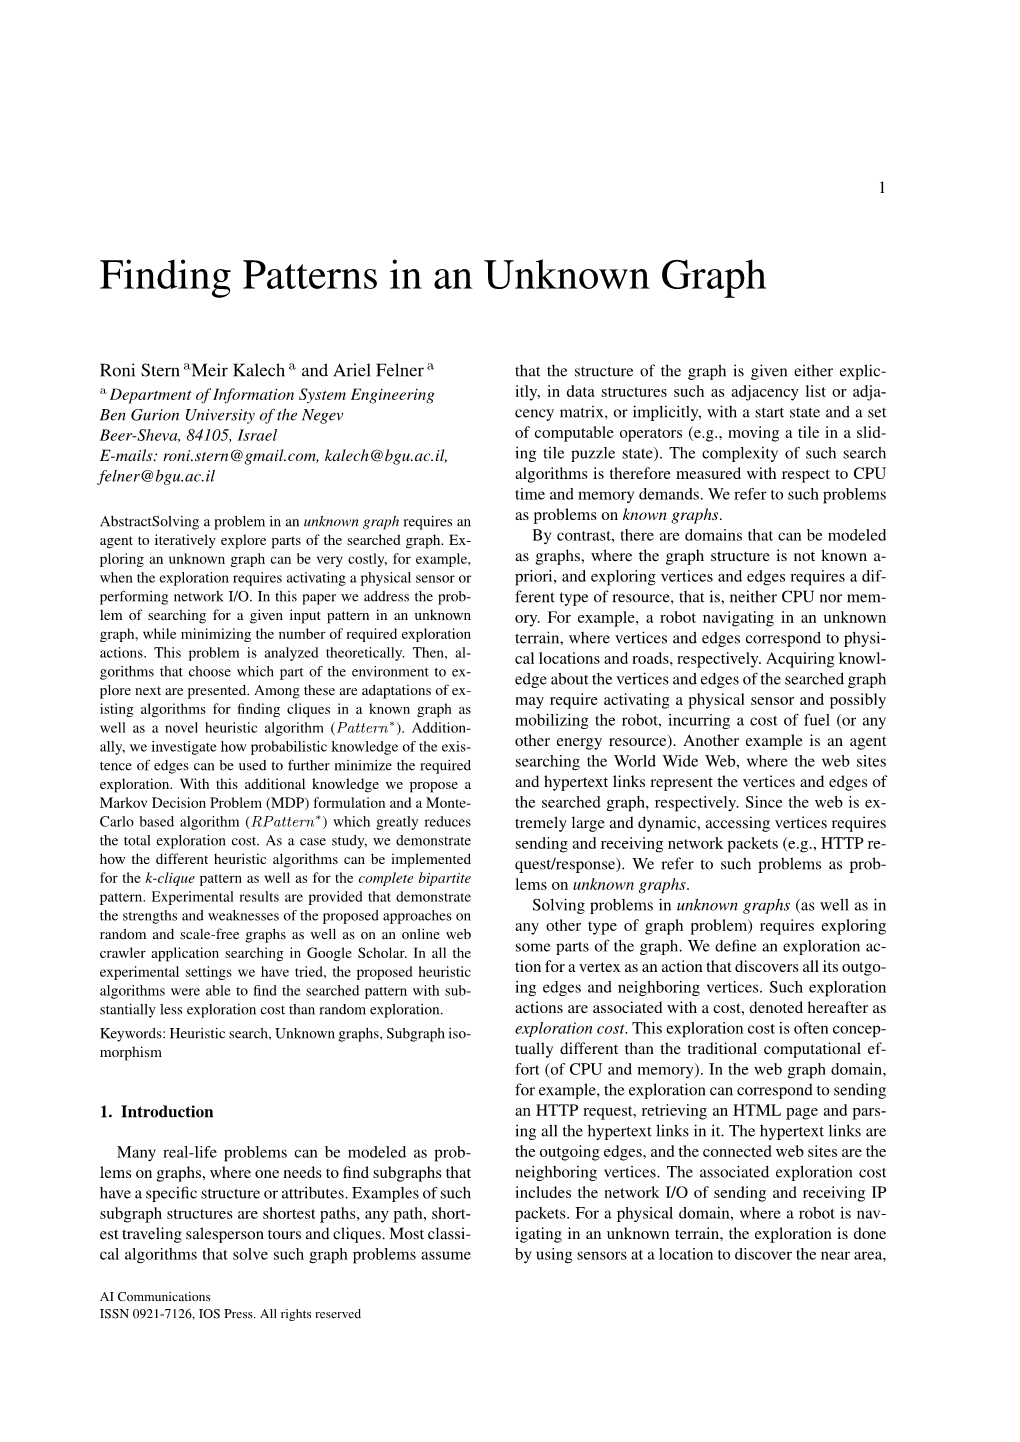 Finding Patterns in an Unknown Graph